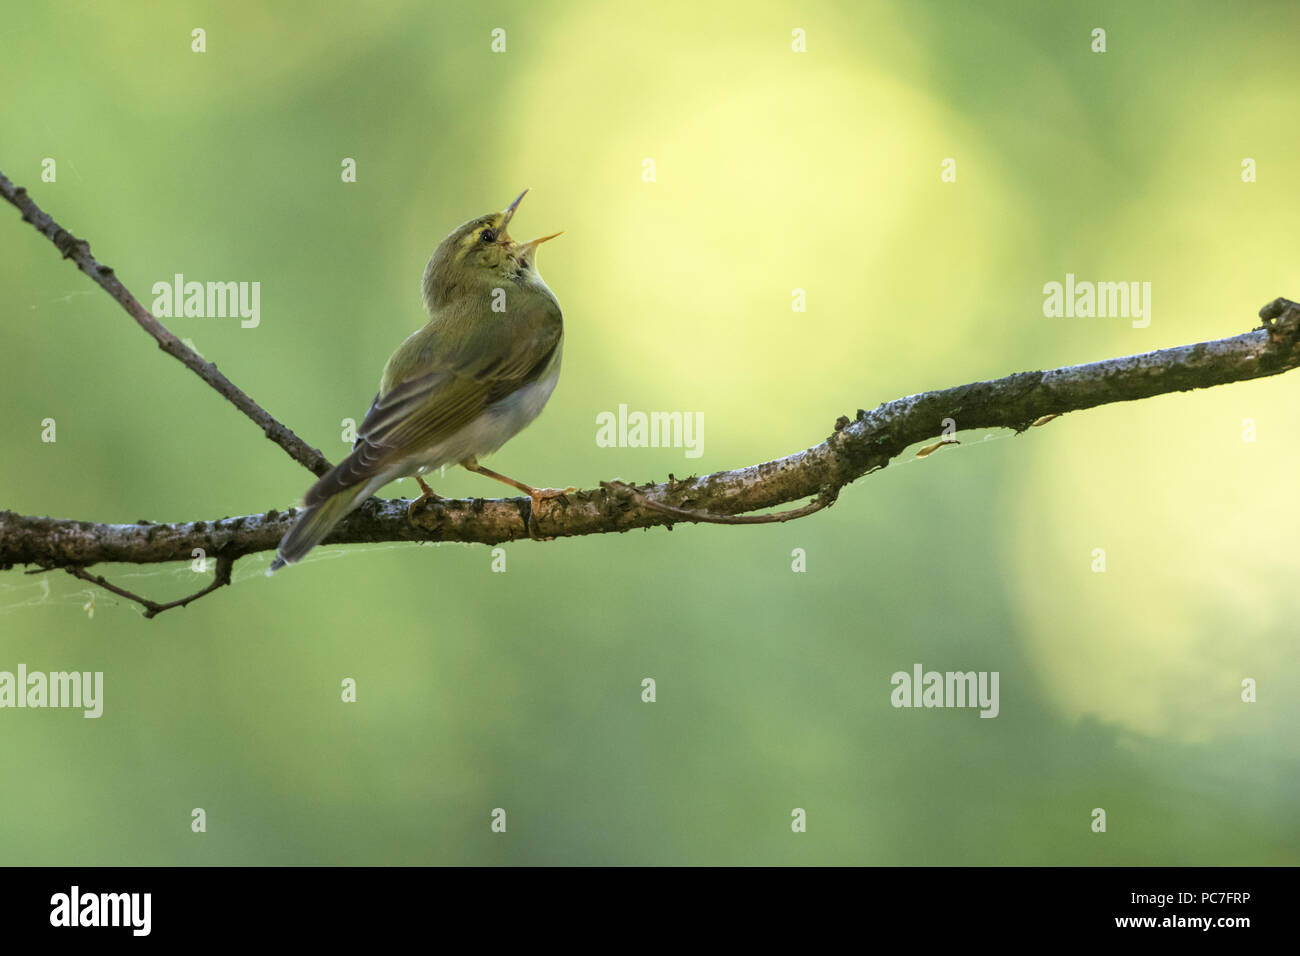 Wood warbler (Phylloscopus sibilatrix), singing on branch in forest, near Trier, Rhineland-Palatinate, Germany, May Stock Photo